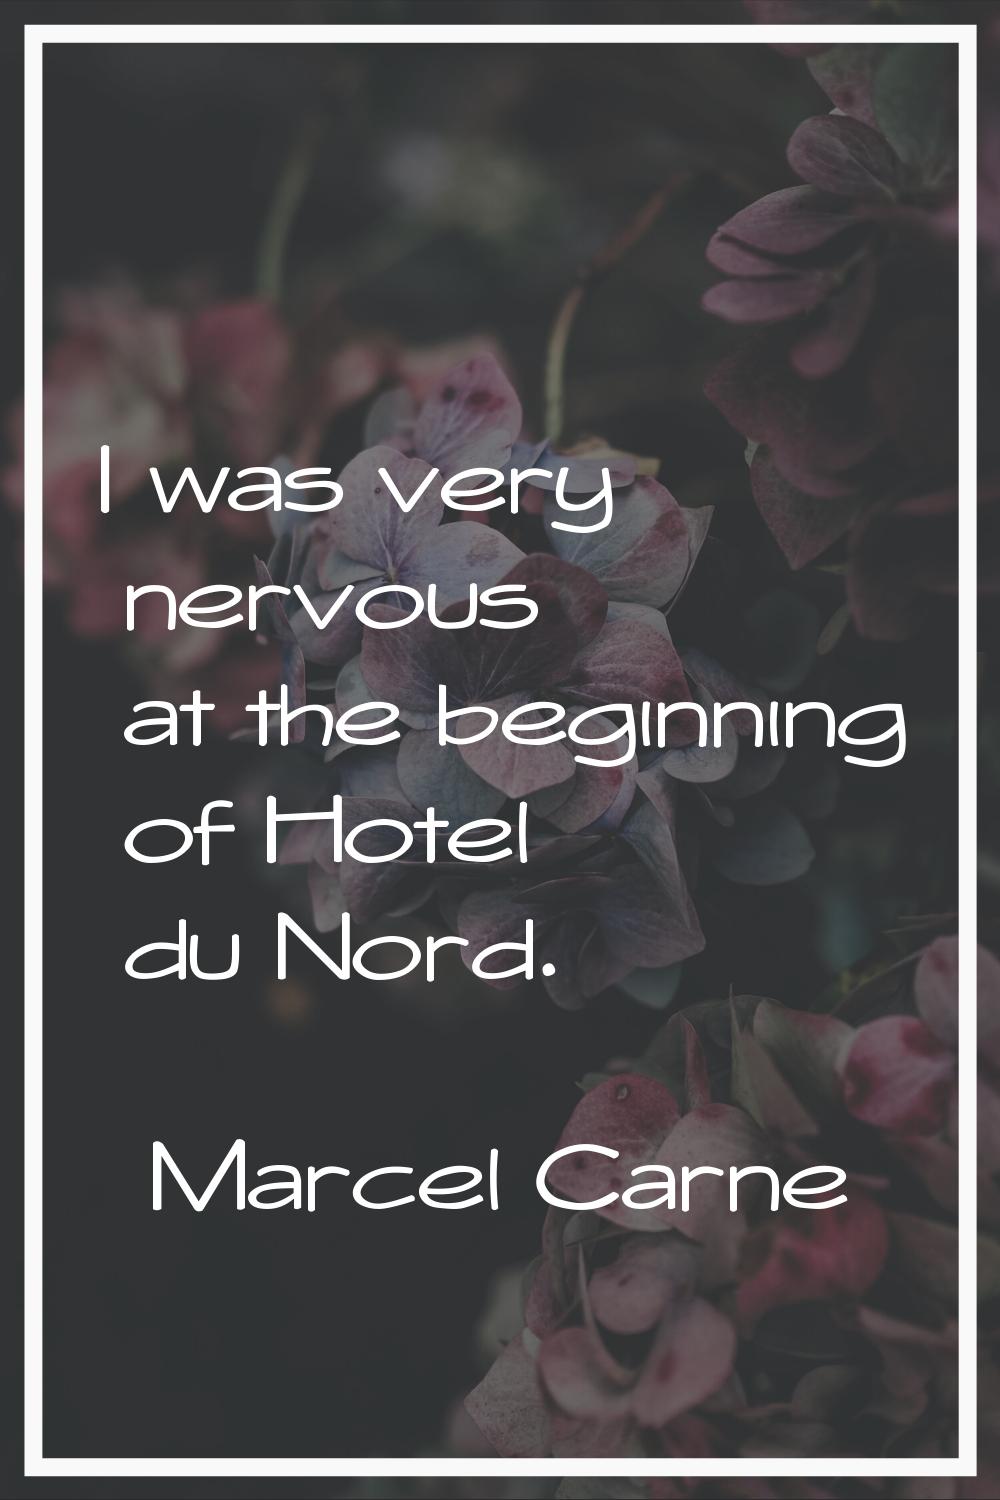 I was very nervous at the beginning of Hotel du Nord.